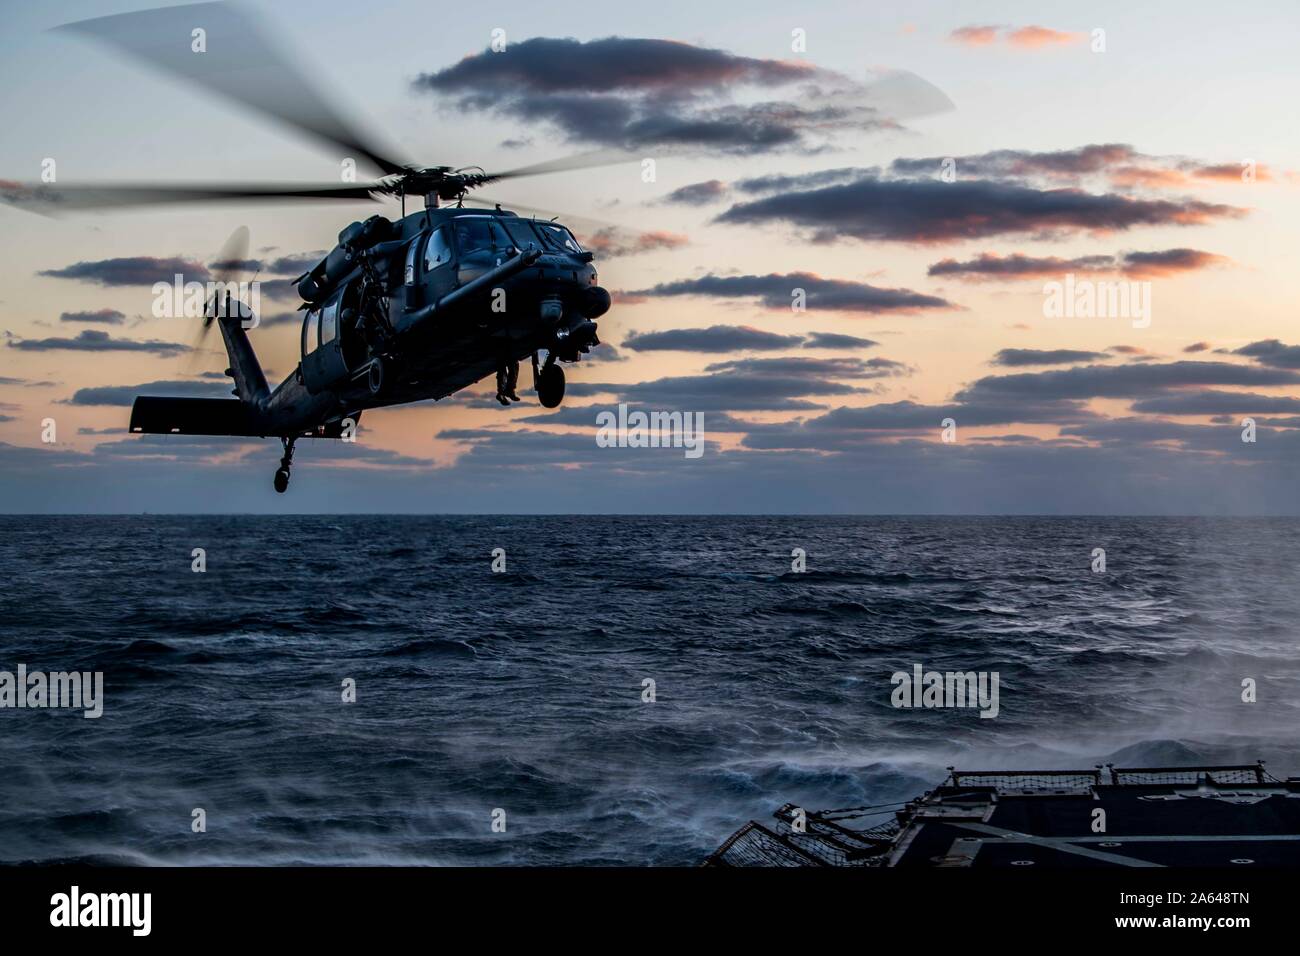 SEA OF JAPAN (Oct. 16, 2019) An HH-60 Pave Hawk helicopter, assigned to the U.S. Air Force’s 33rd Rescue Squadron, prepares to land on the flight deck of the Arleigh Burke-class guided-missile destroyer USS Milius (DDG 69) during joint deck landing qualifications. Milius is underway conducting operations in the Indo-Pacific region while assigned to Destroyer Squadron (DESRON) 15, the Navy’s largest forward-deployed DESRON and the U.S. 7th Fleet’s principal surface force. (U.S. Navy photo by Mass Communication Specialist 2nd Class Taylor DiMartino) Stock Photo